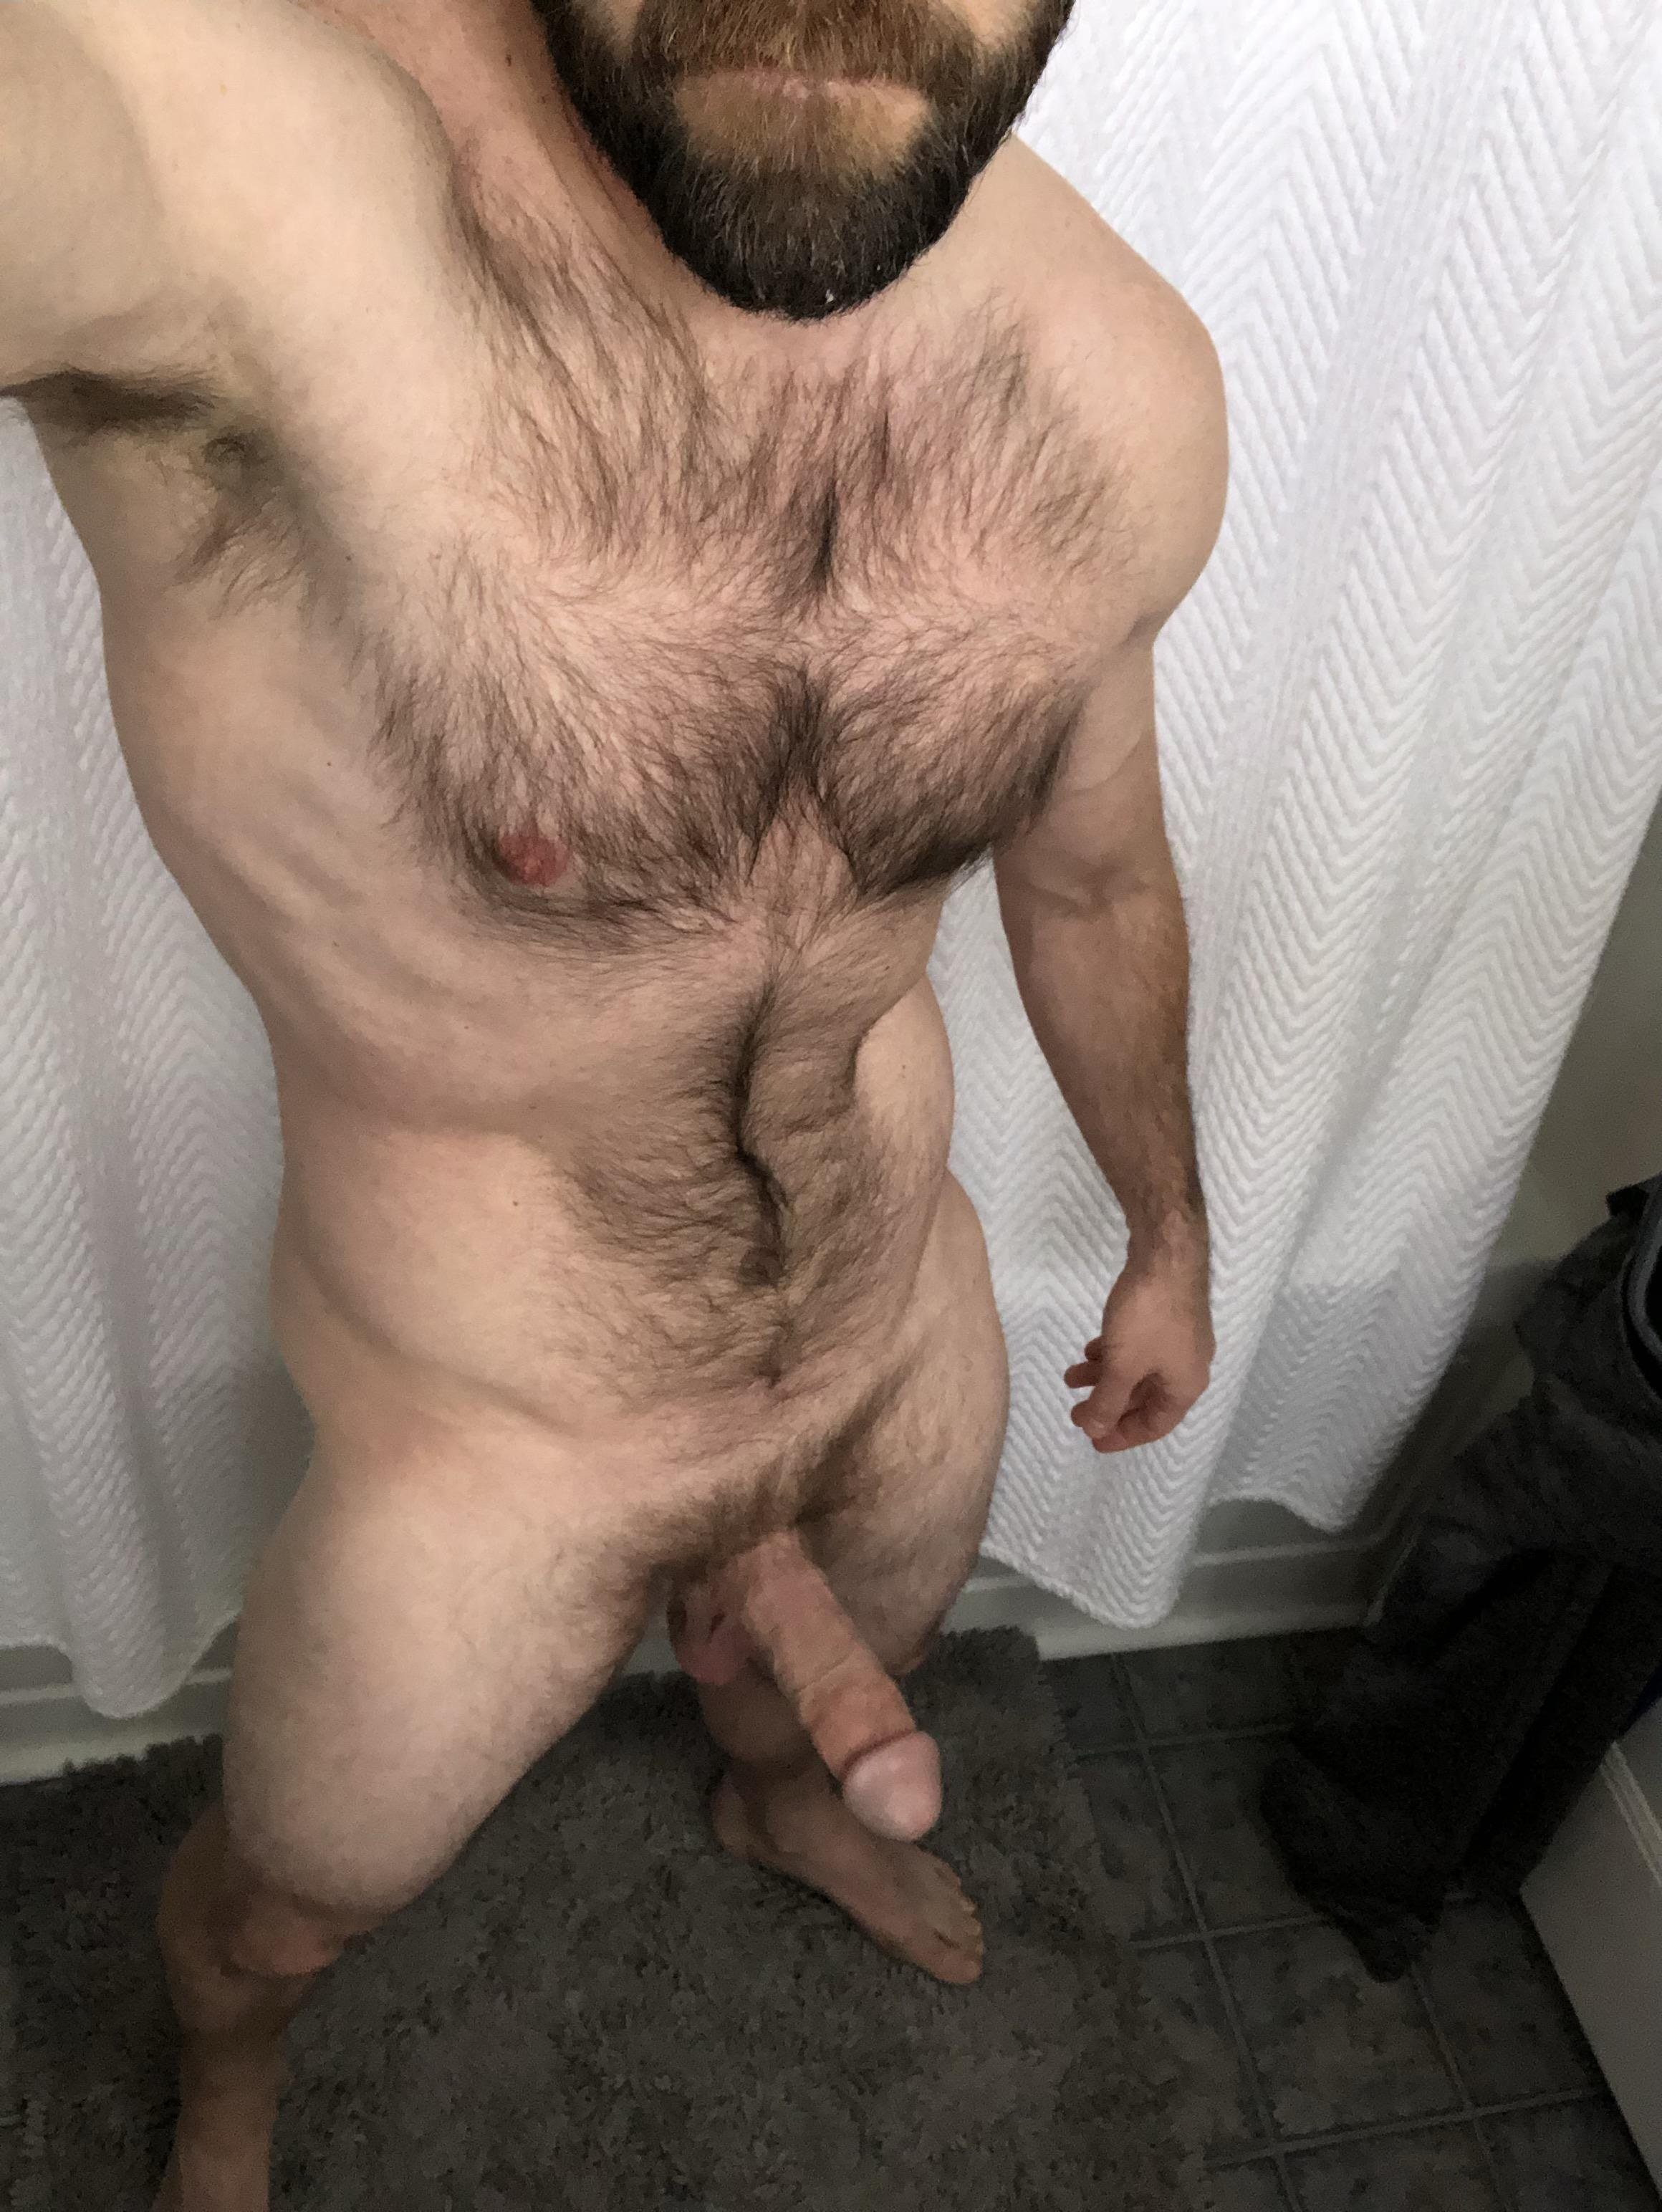 Keeping it warm and hairy for the holidays